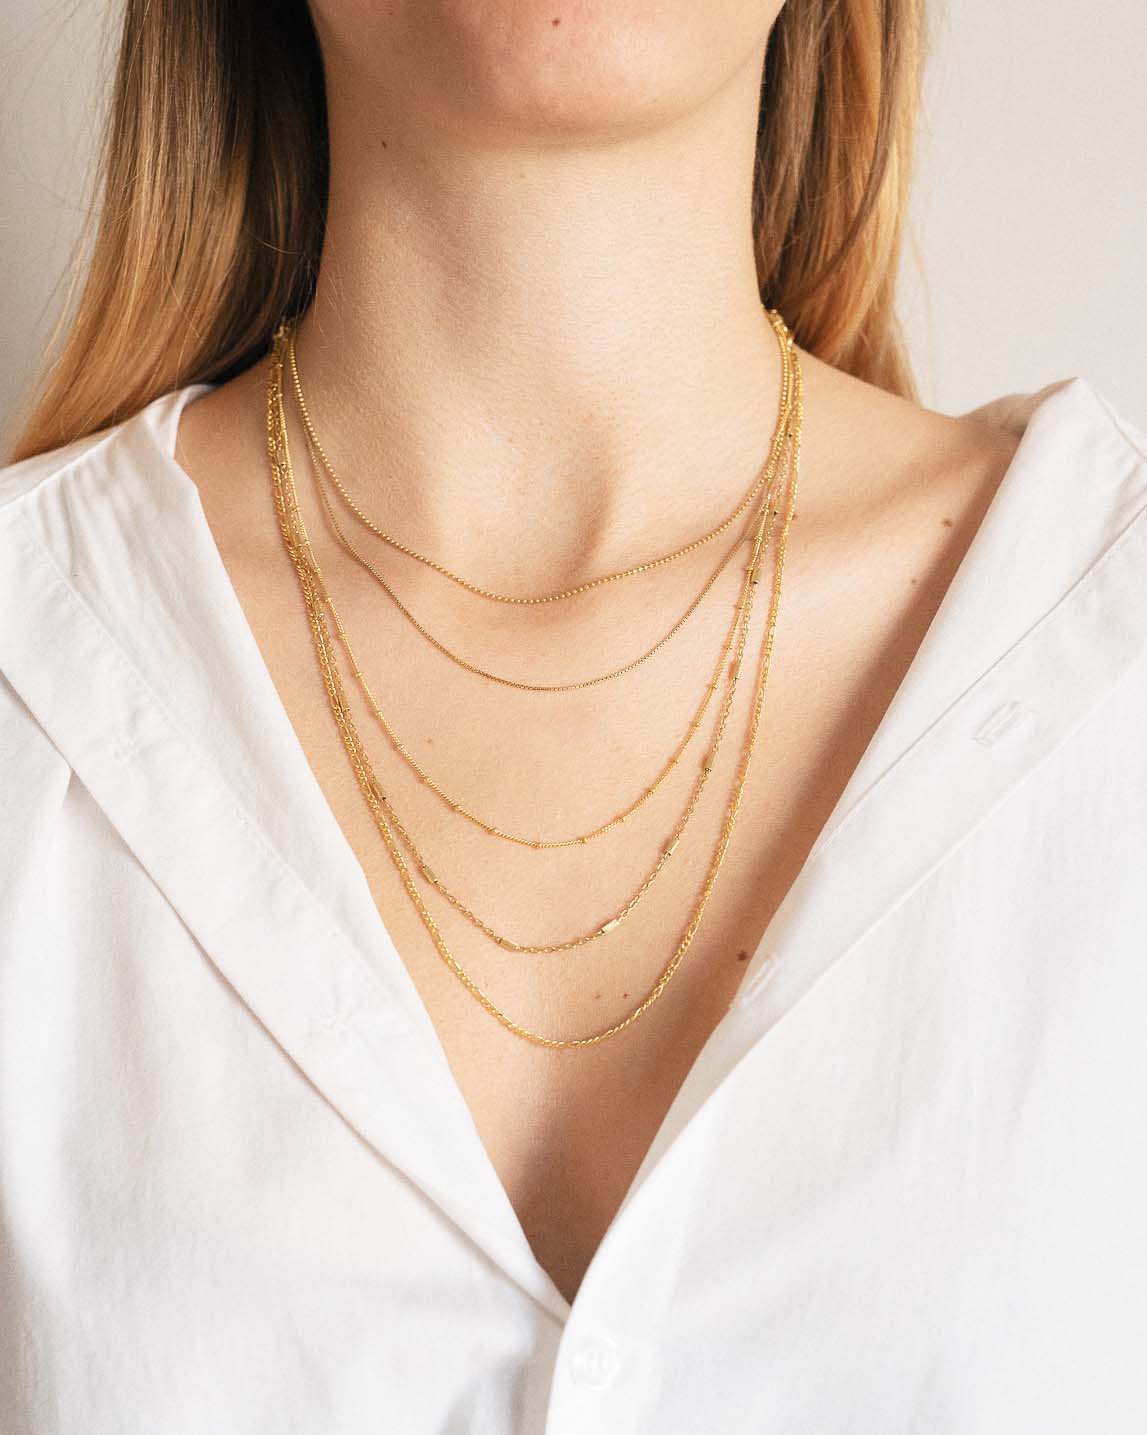 The Average Necklace Length